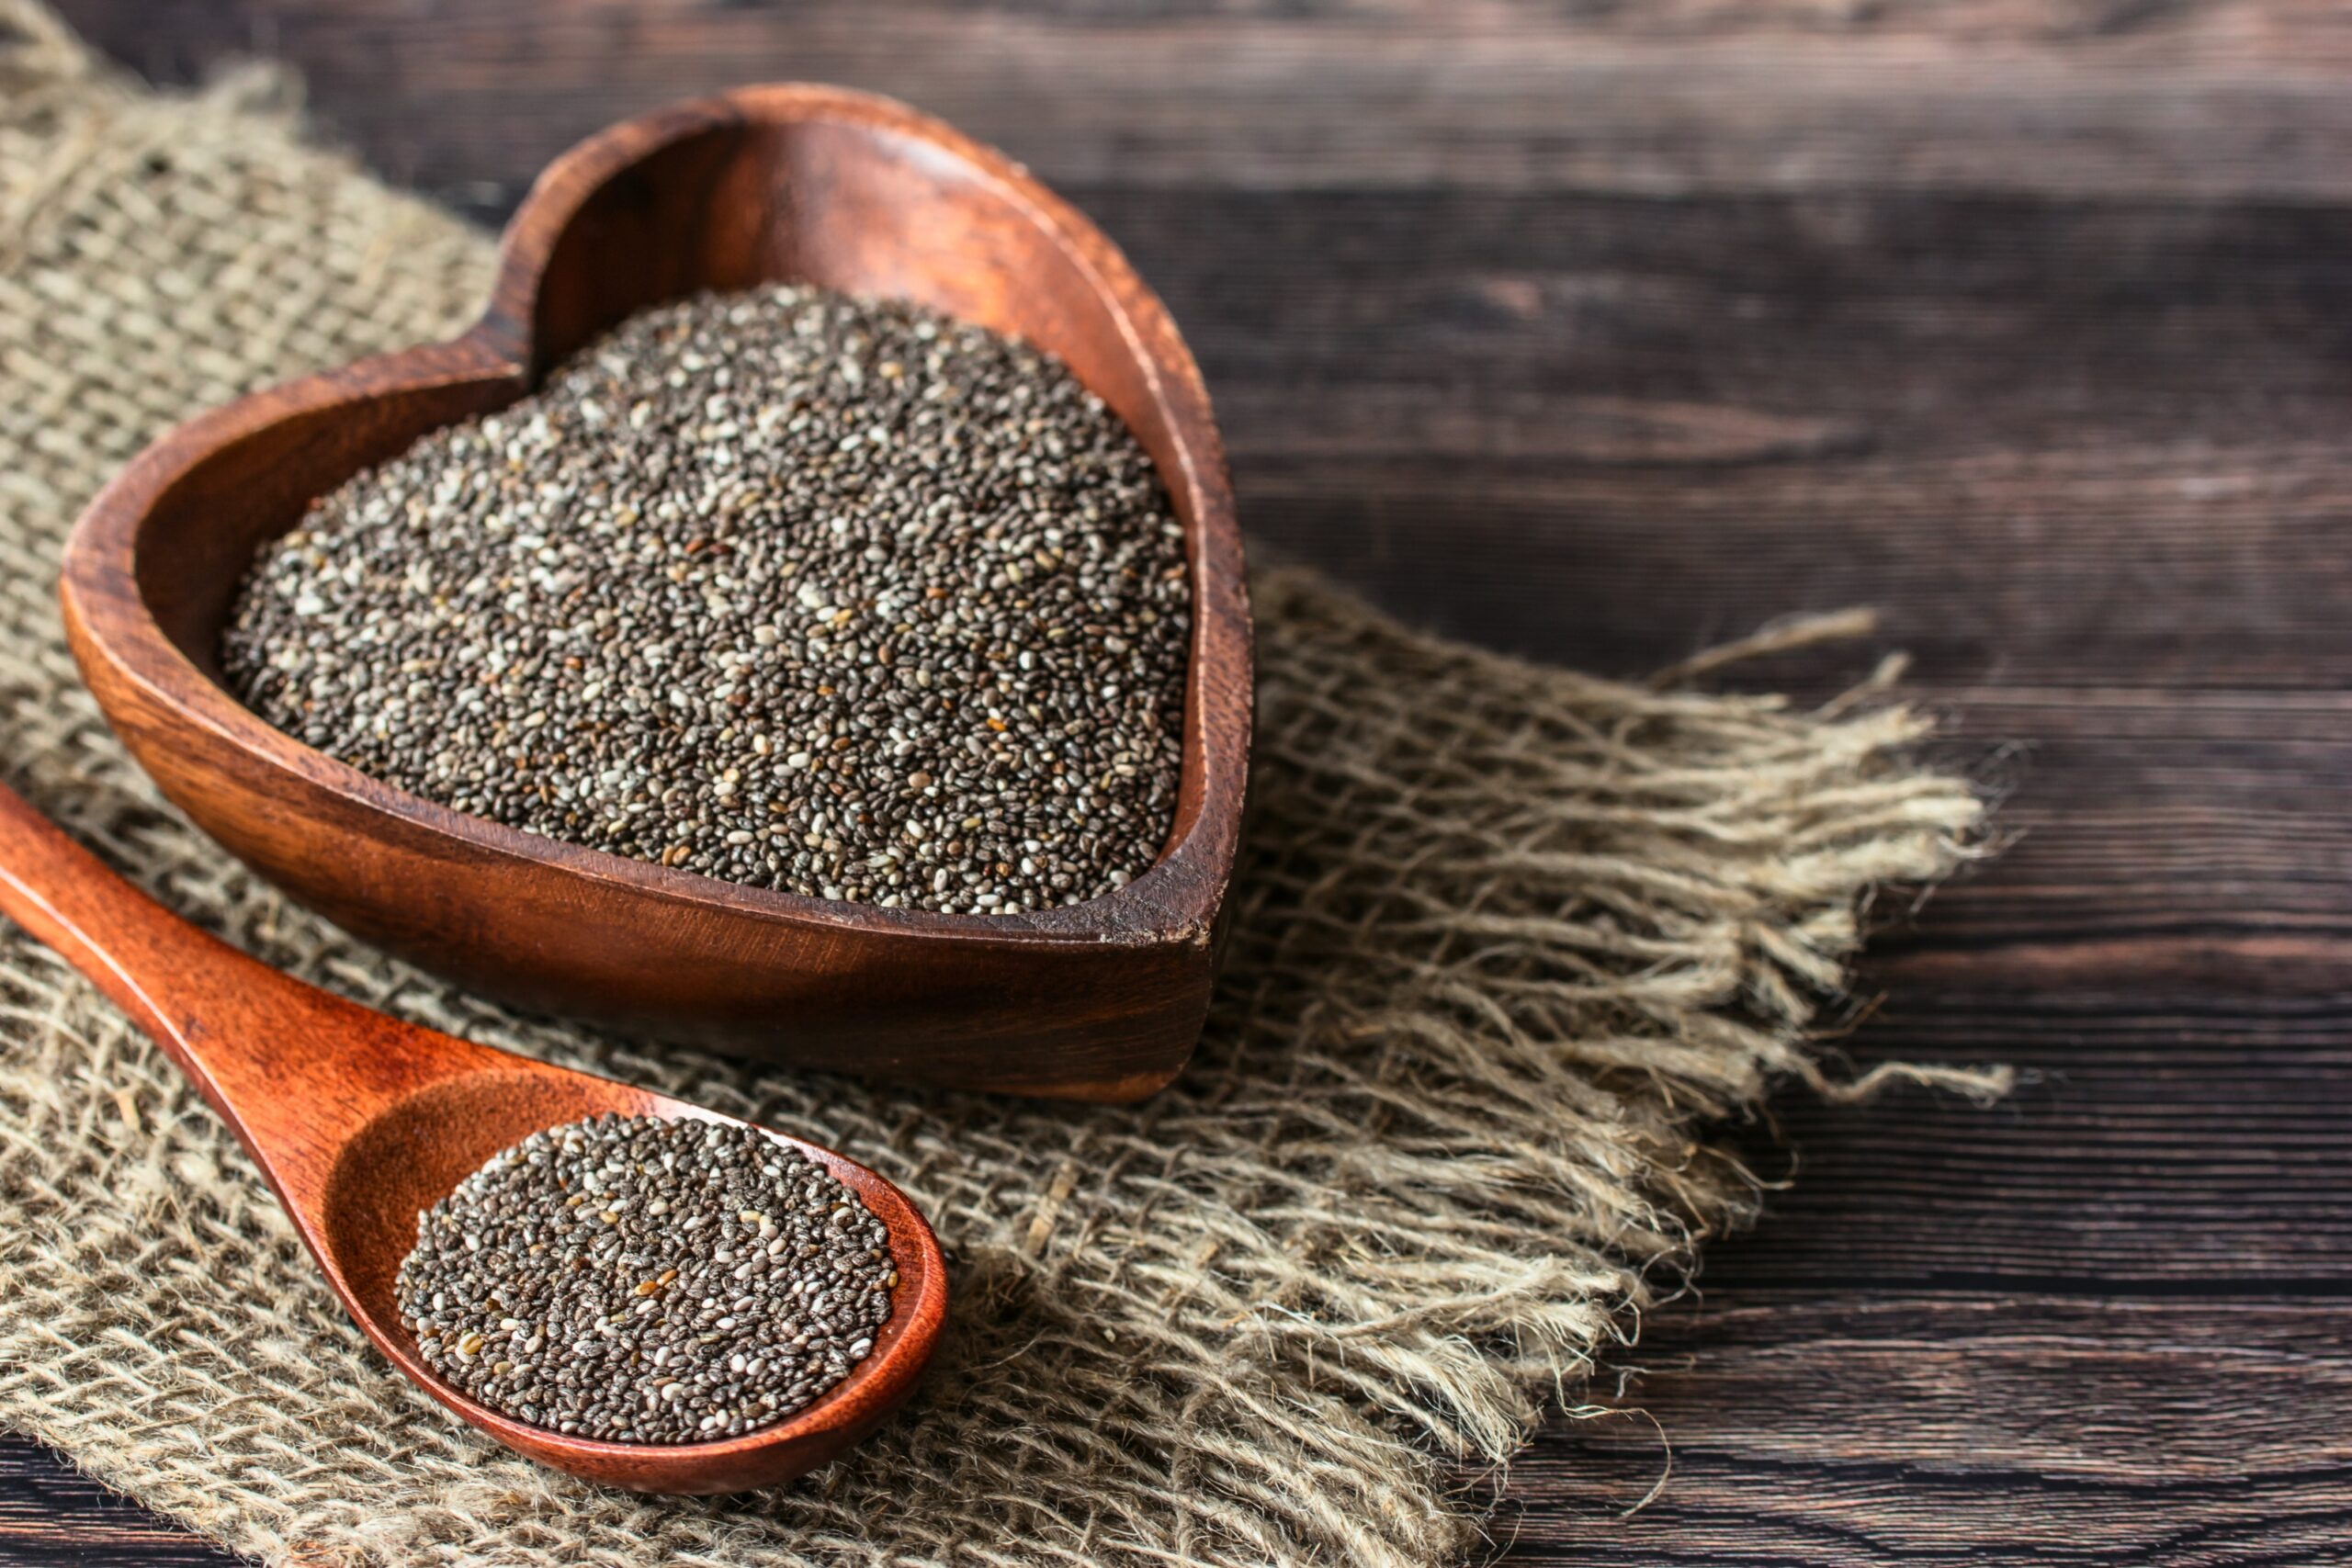 Can Chia Seeds Help With Body Weight?